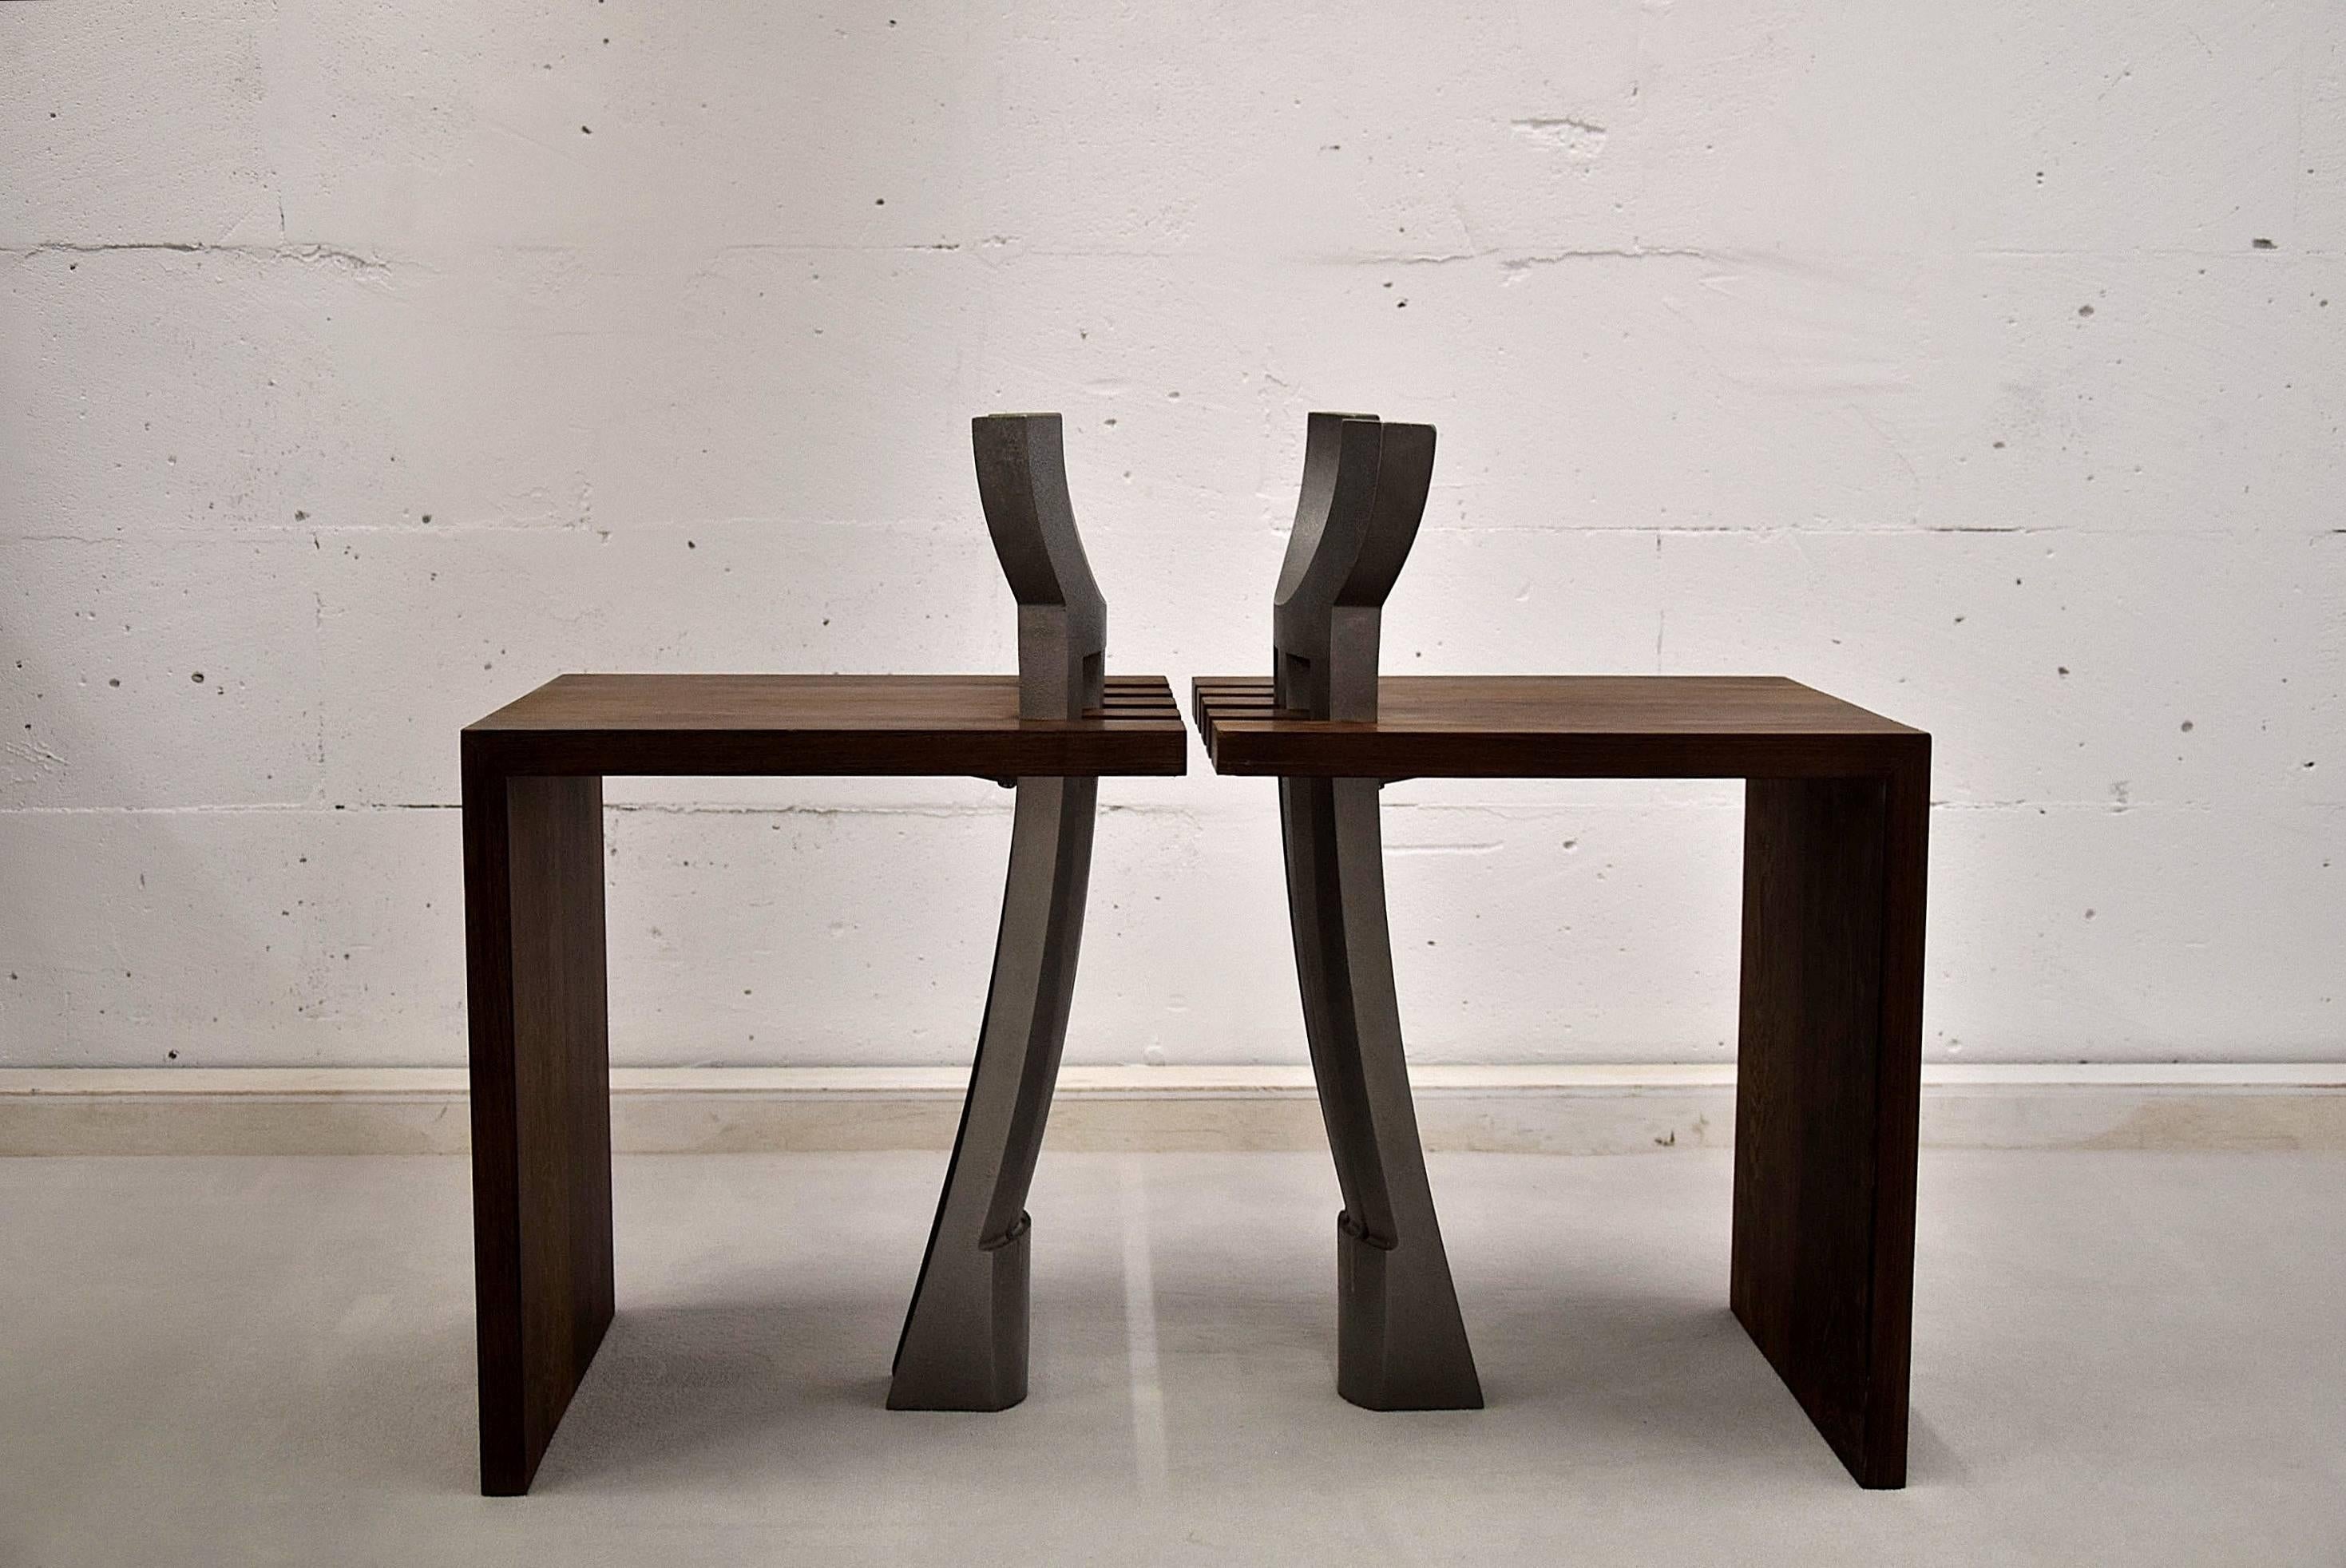 Wenge and Aluminium Contemporary Stools In Good Condition For Sale In Weesp, NL